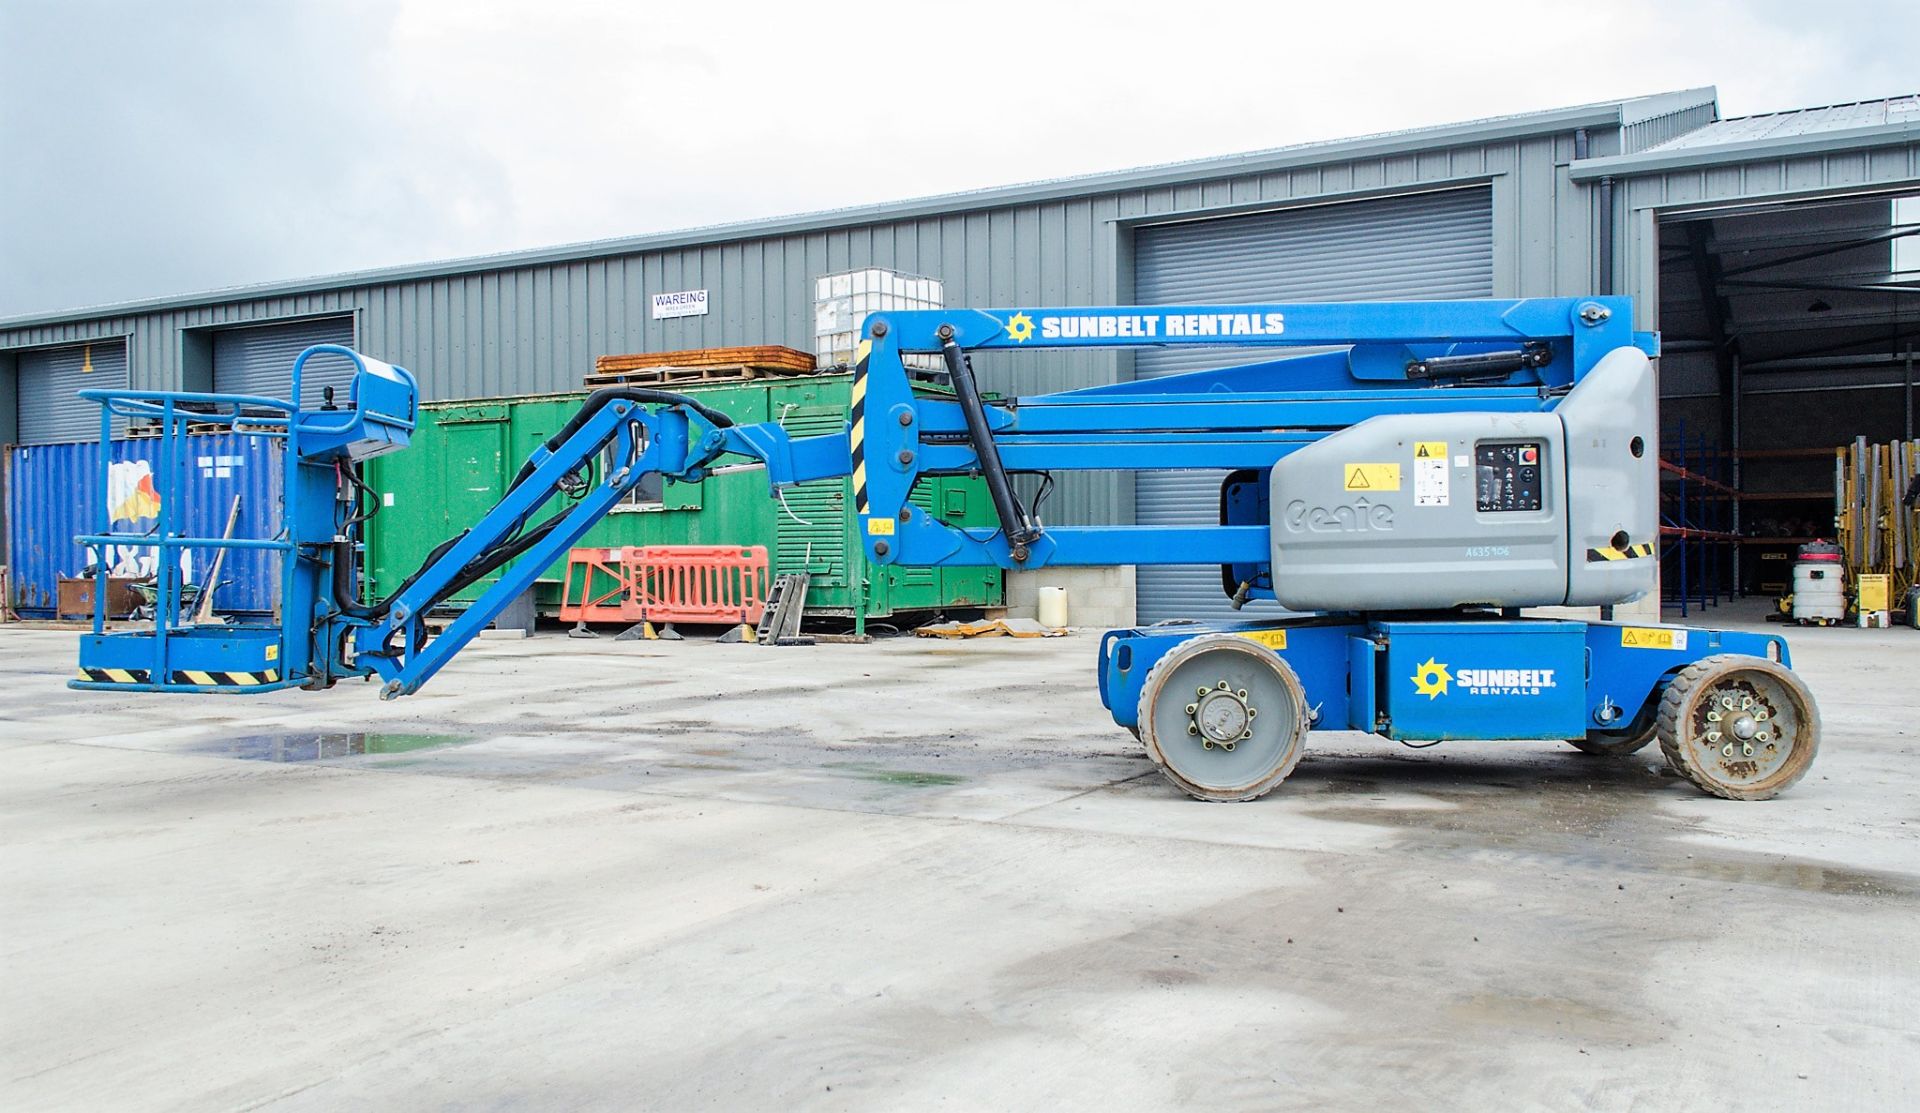 Genie Z40/23N RJ battery electric articulated boom access platform Year: 2014 S/N: Z40N14-2561 - Image 7 of 13